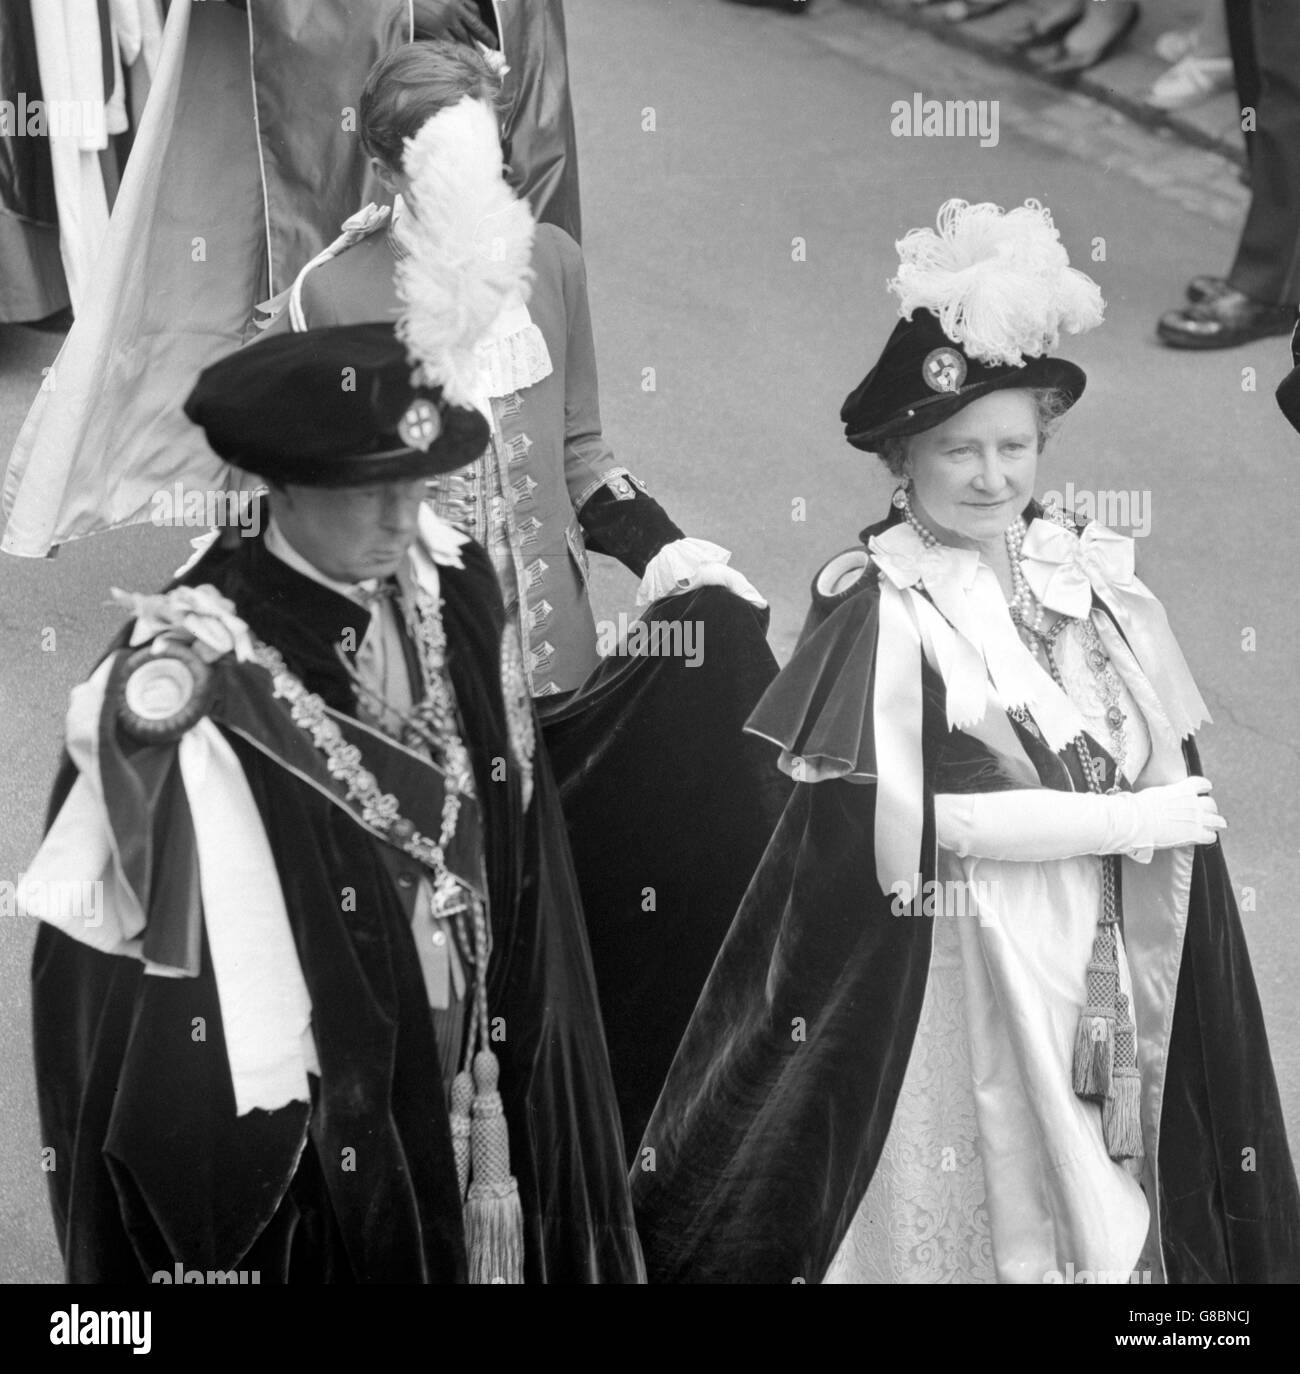 Resplendent in blue velvet mantles and hats ornamented with ostrich plumes, Queen Elizabeth the Queen Mother walks in procession with the Duke of Norfolk at Windsor Castle. They are to attend the Order of the Garter Service in St George's Chapel. Stock Photo